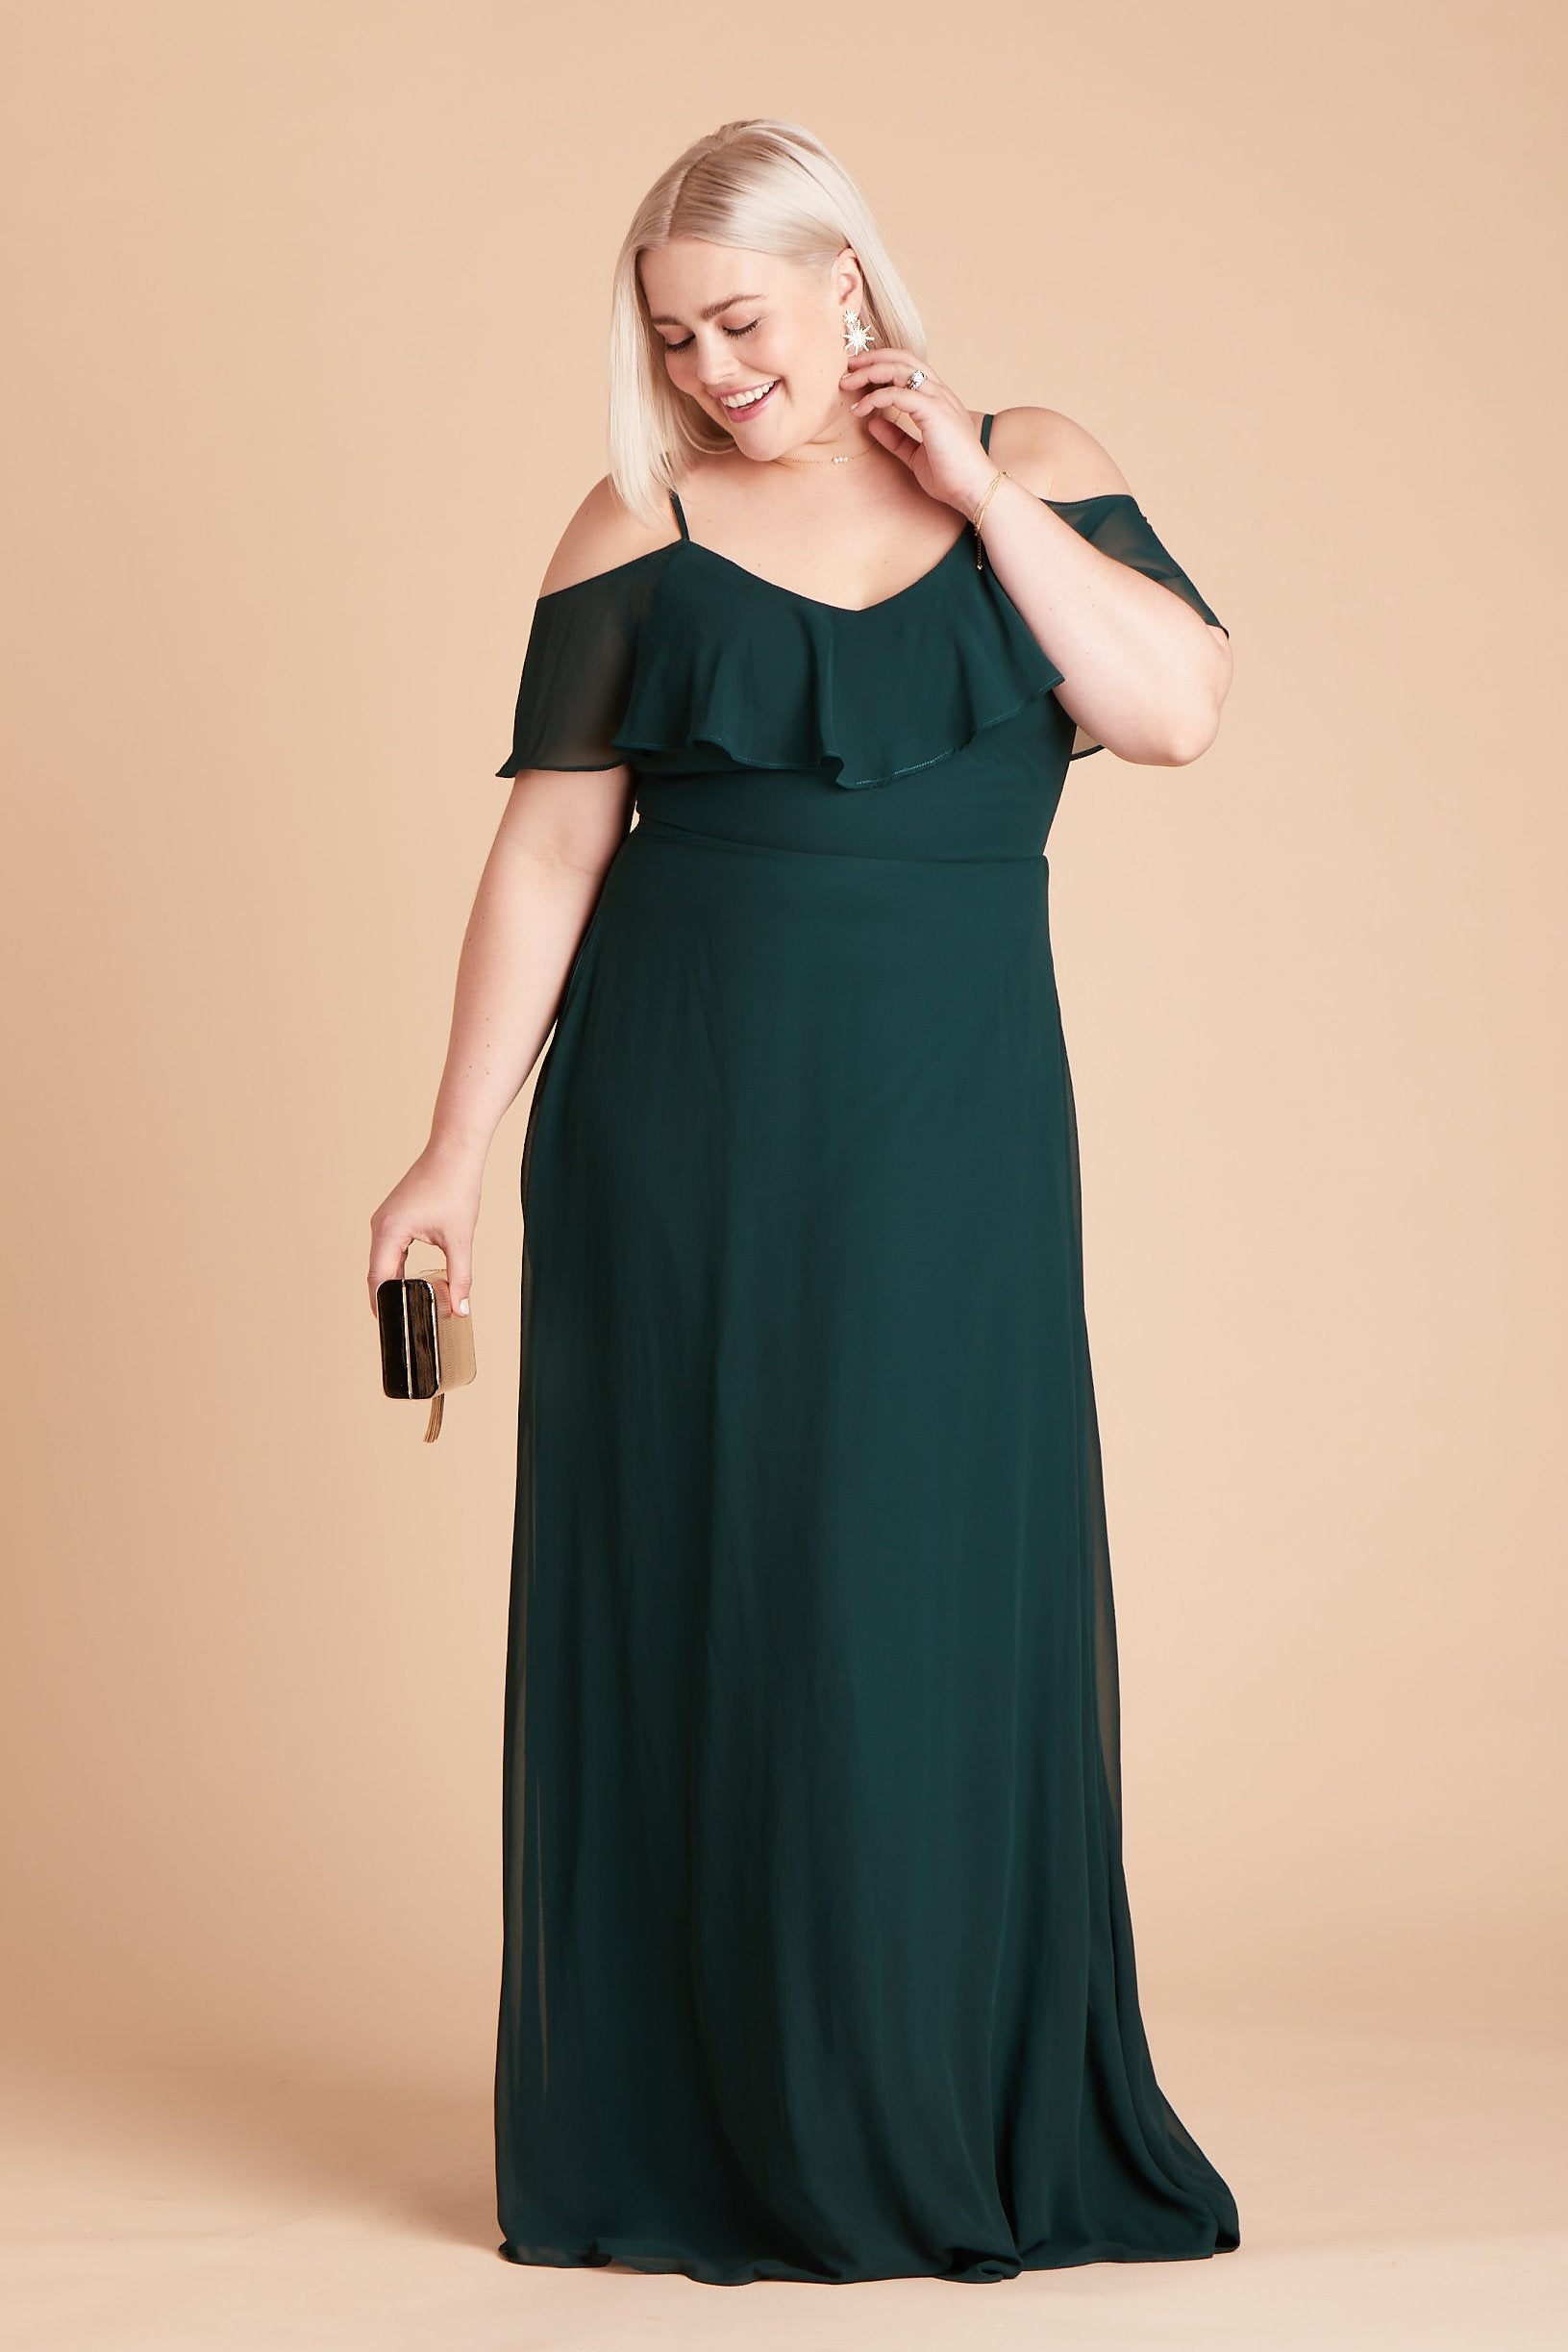 Jane convertible plus size bridesmaid dress in emerald green chiffon by Birdy Grey, front view